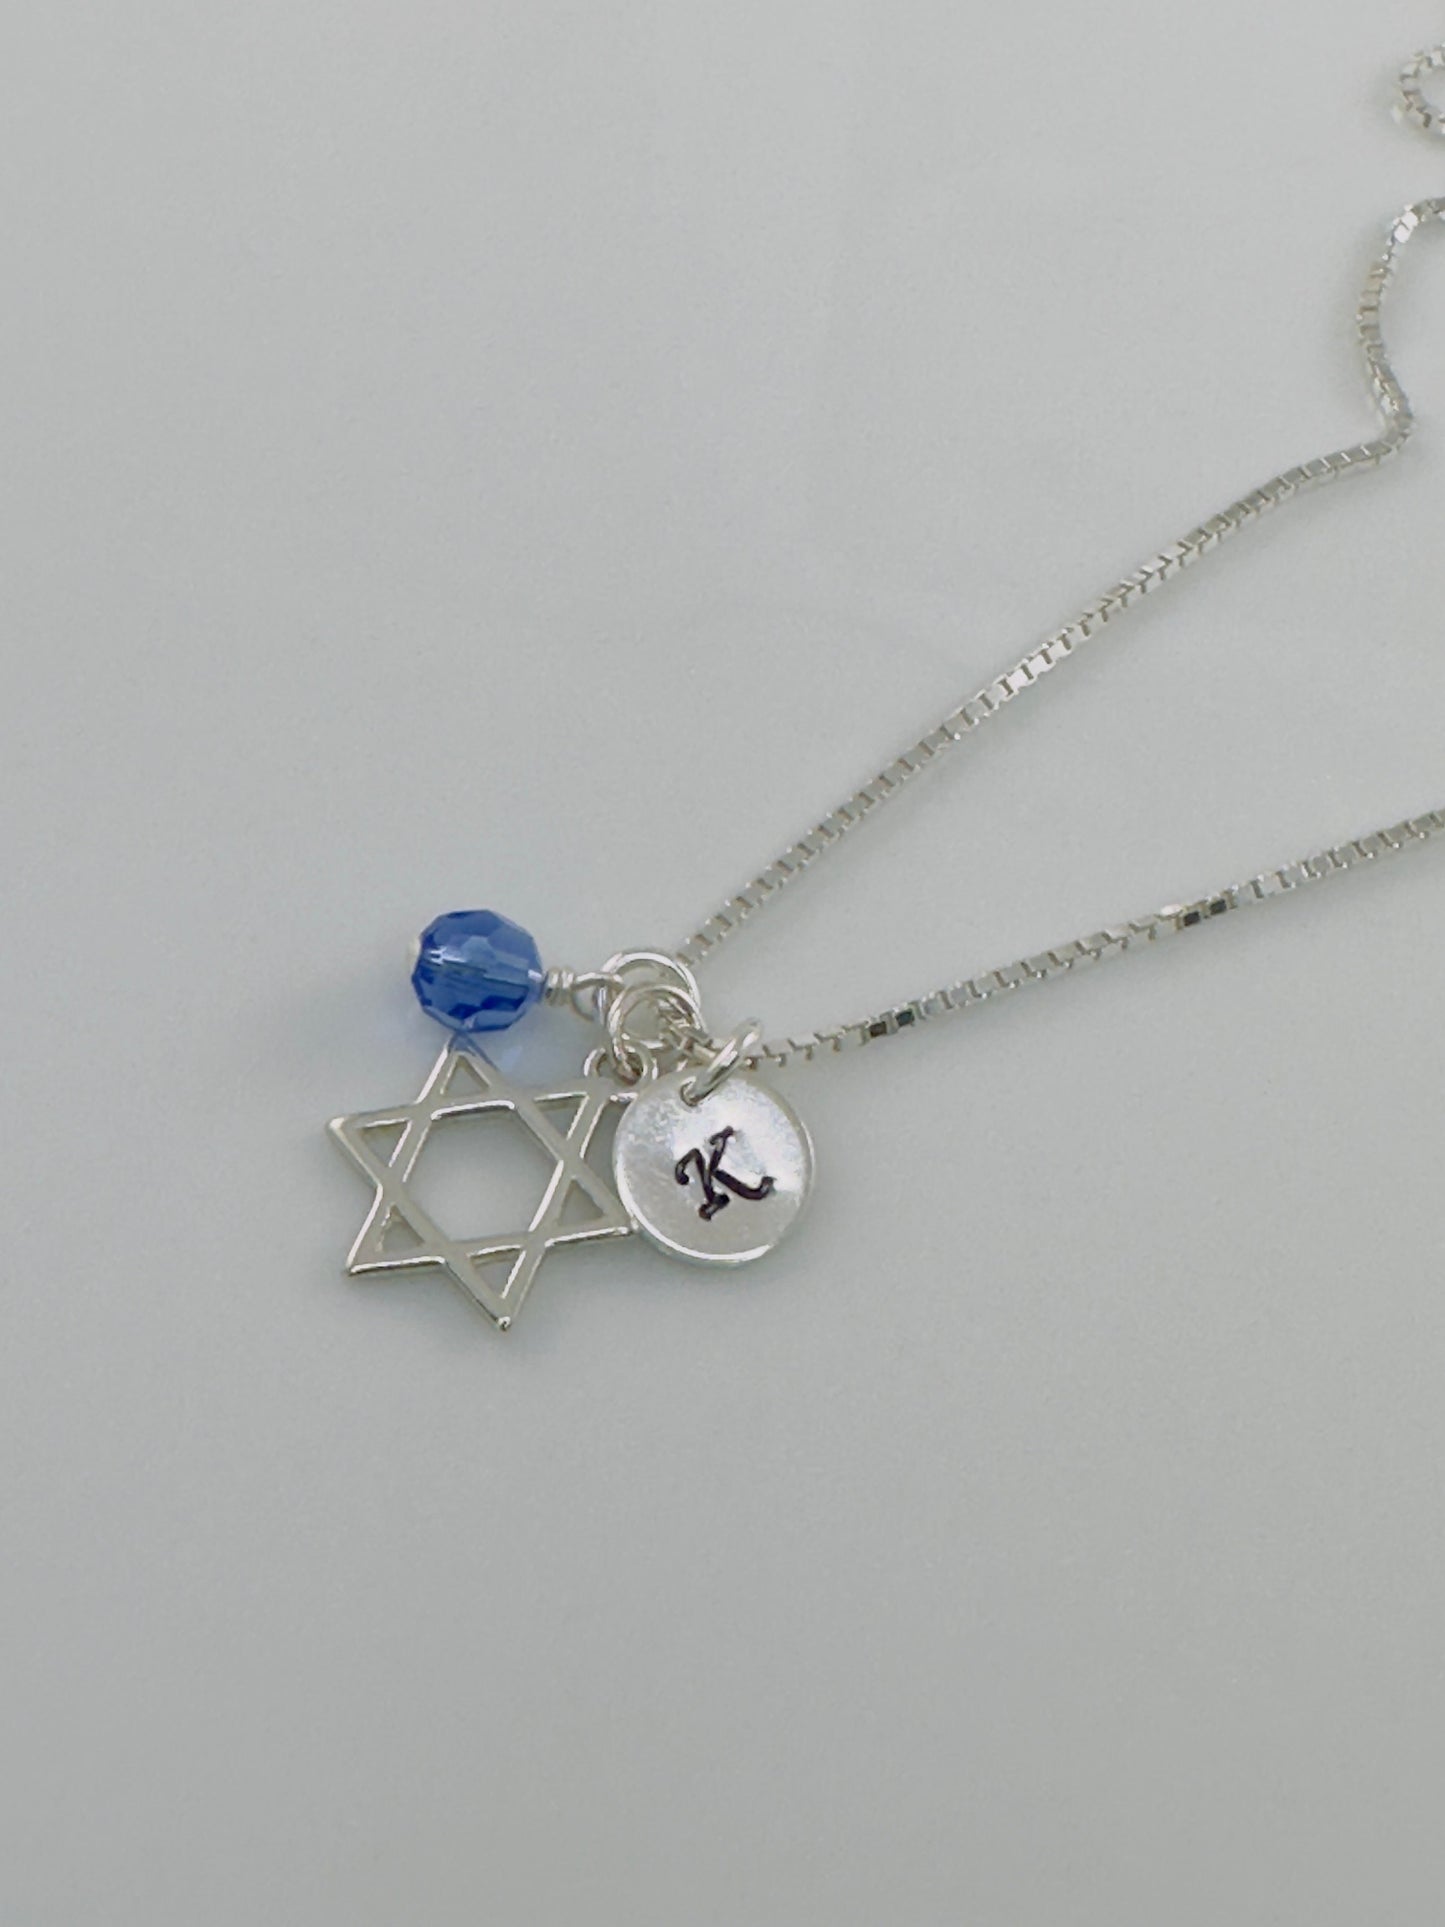 Star of David Charm Necklace for Bat Mitzvah,Star of David Necklace,Bat Mitzvah Jewelry,Jewish Jewelry,Personalized Initial and Birthstone